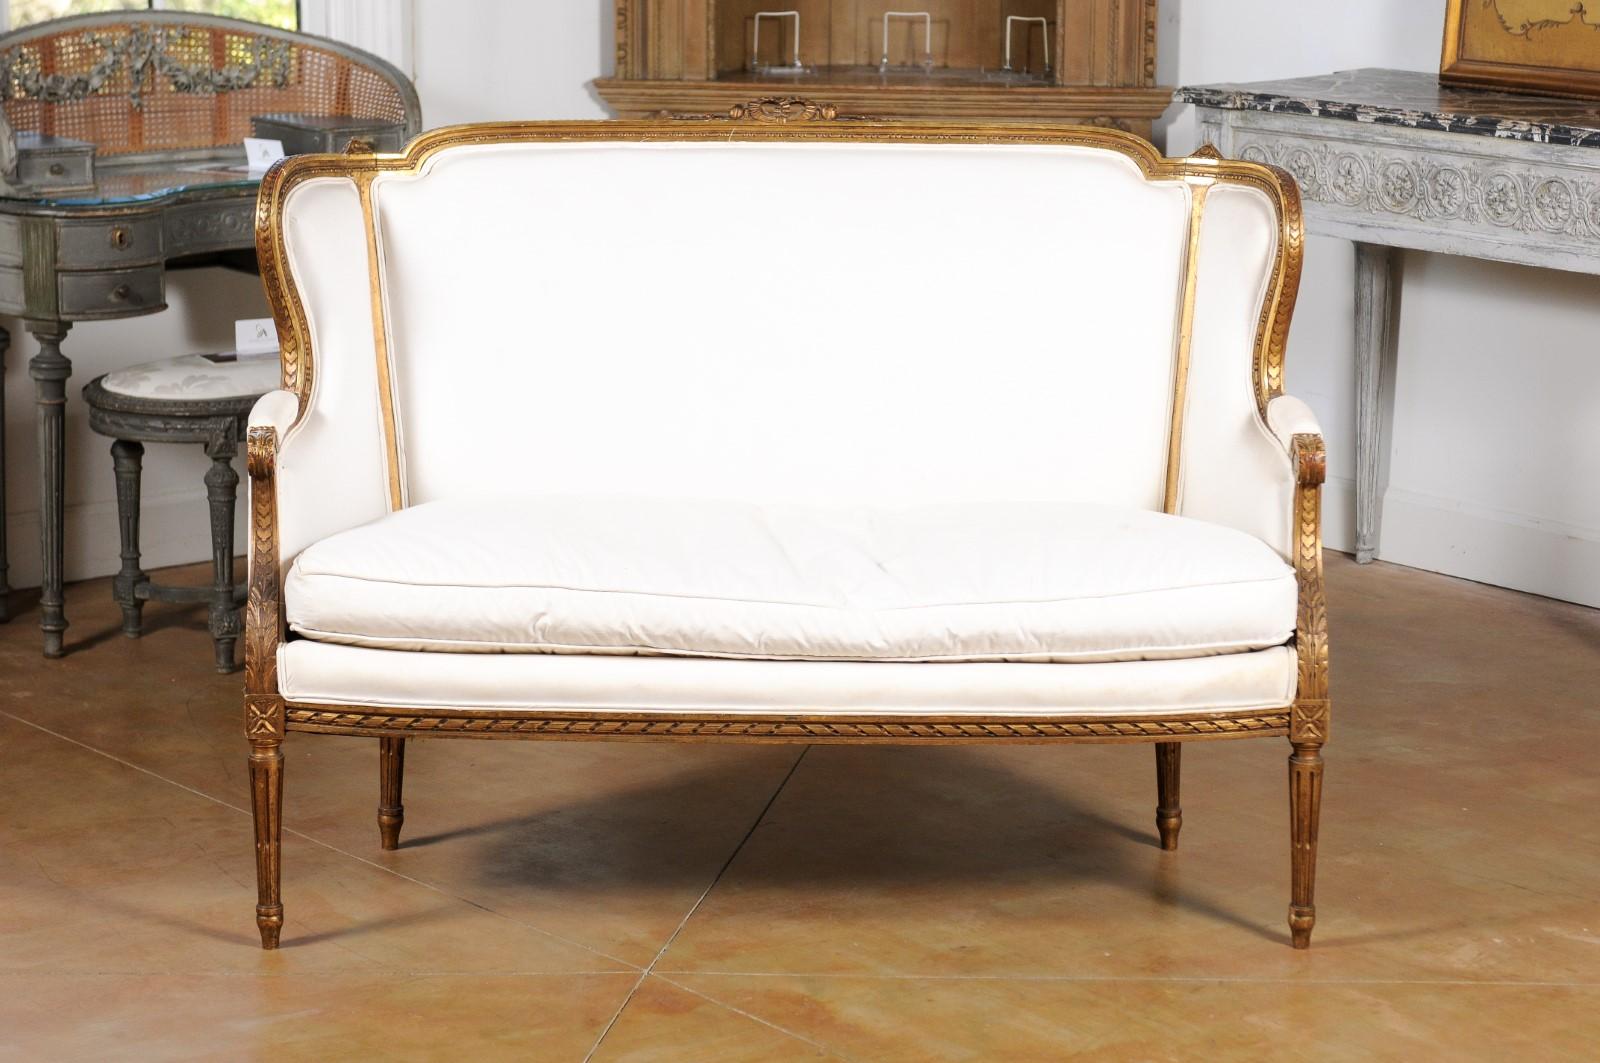 A French Louis XVI style settee from the early 19th century, with original gilding and new upholstery. Born in France during the early years of the 19th century, this settee features a wingback topped with a carved ribbon and accented with bead and